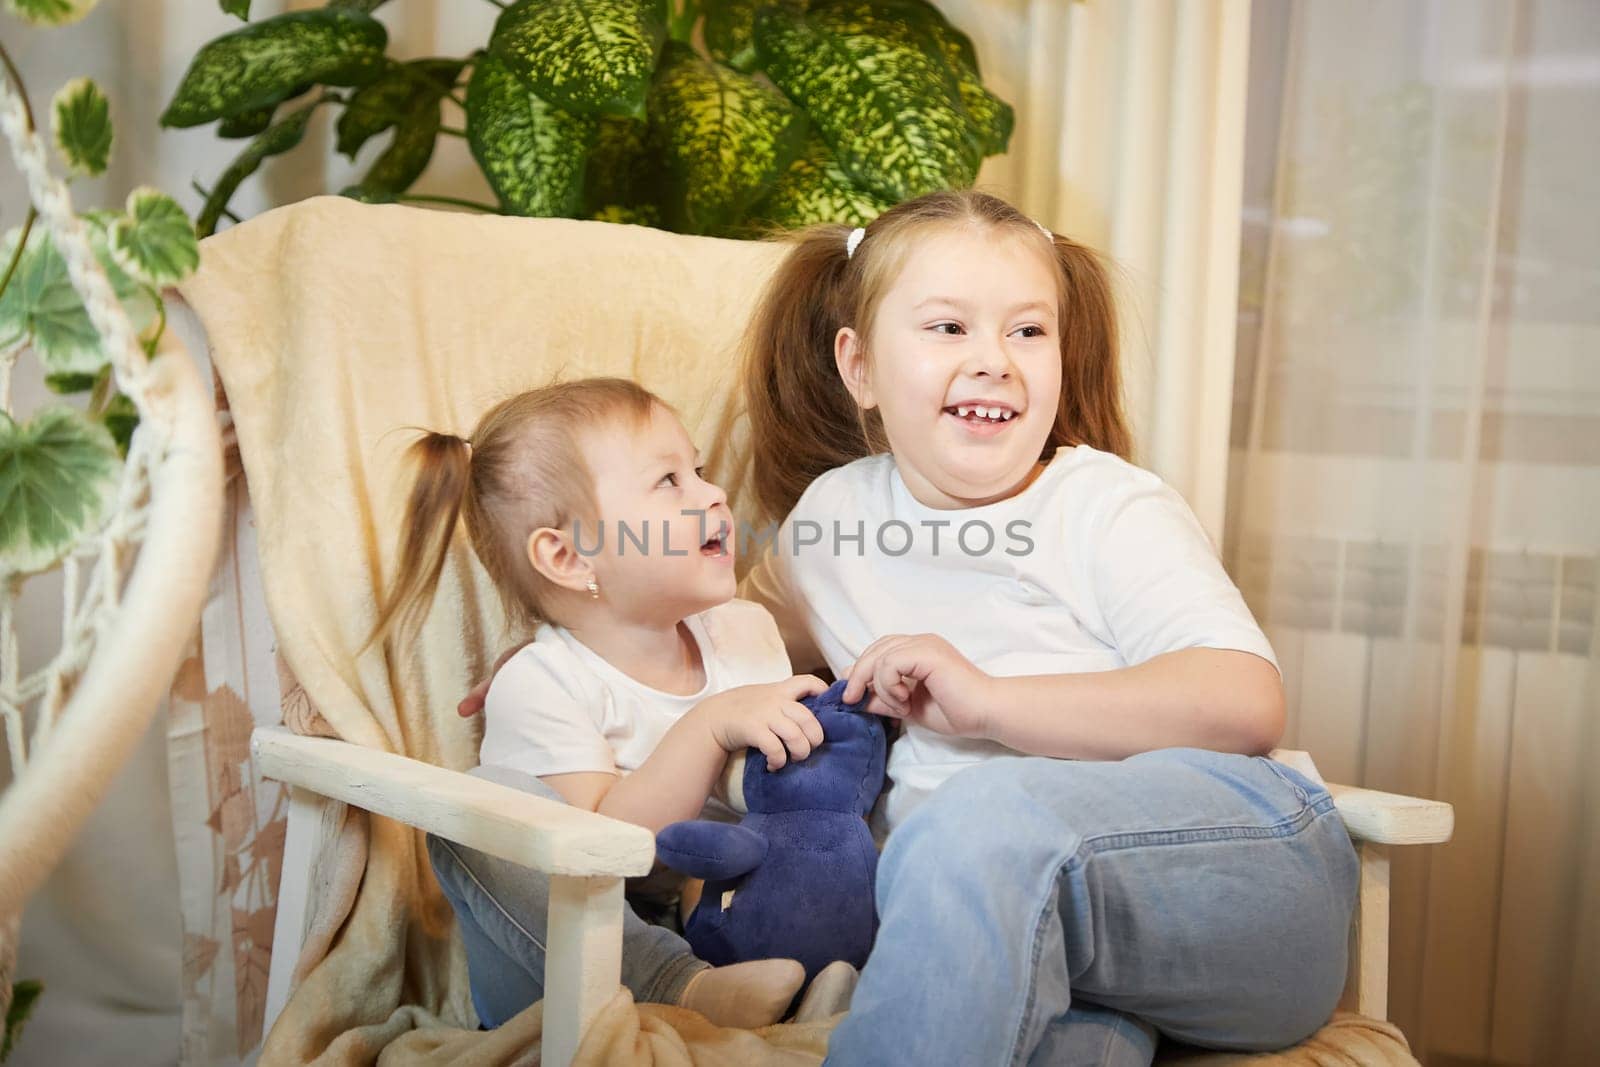 Happy time concept. Girls Sisters in chair and having fun. Female Preschooler and teenager playing and relaxing in room